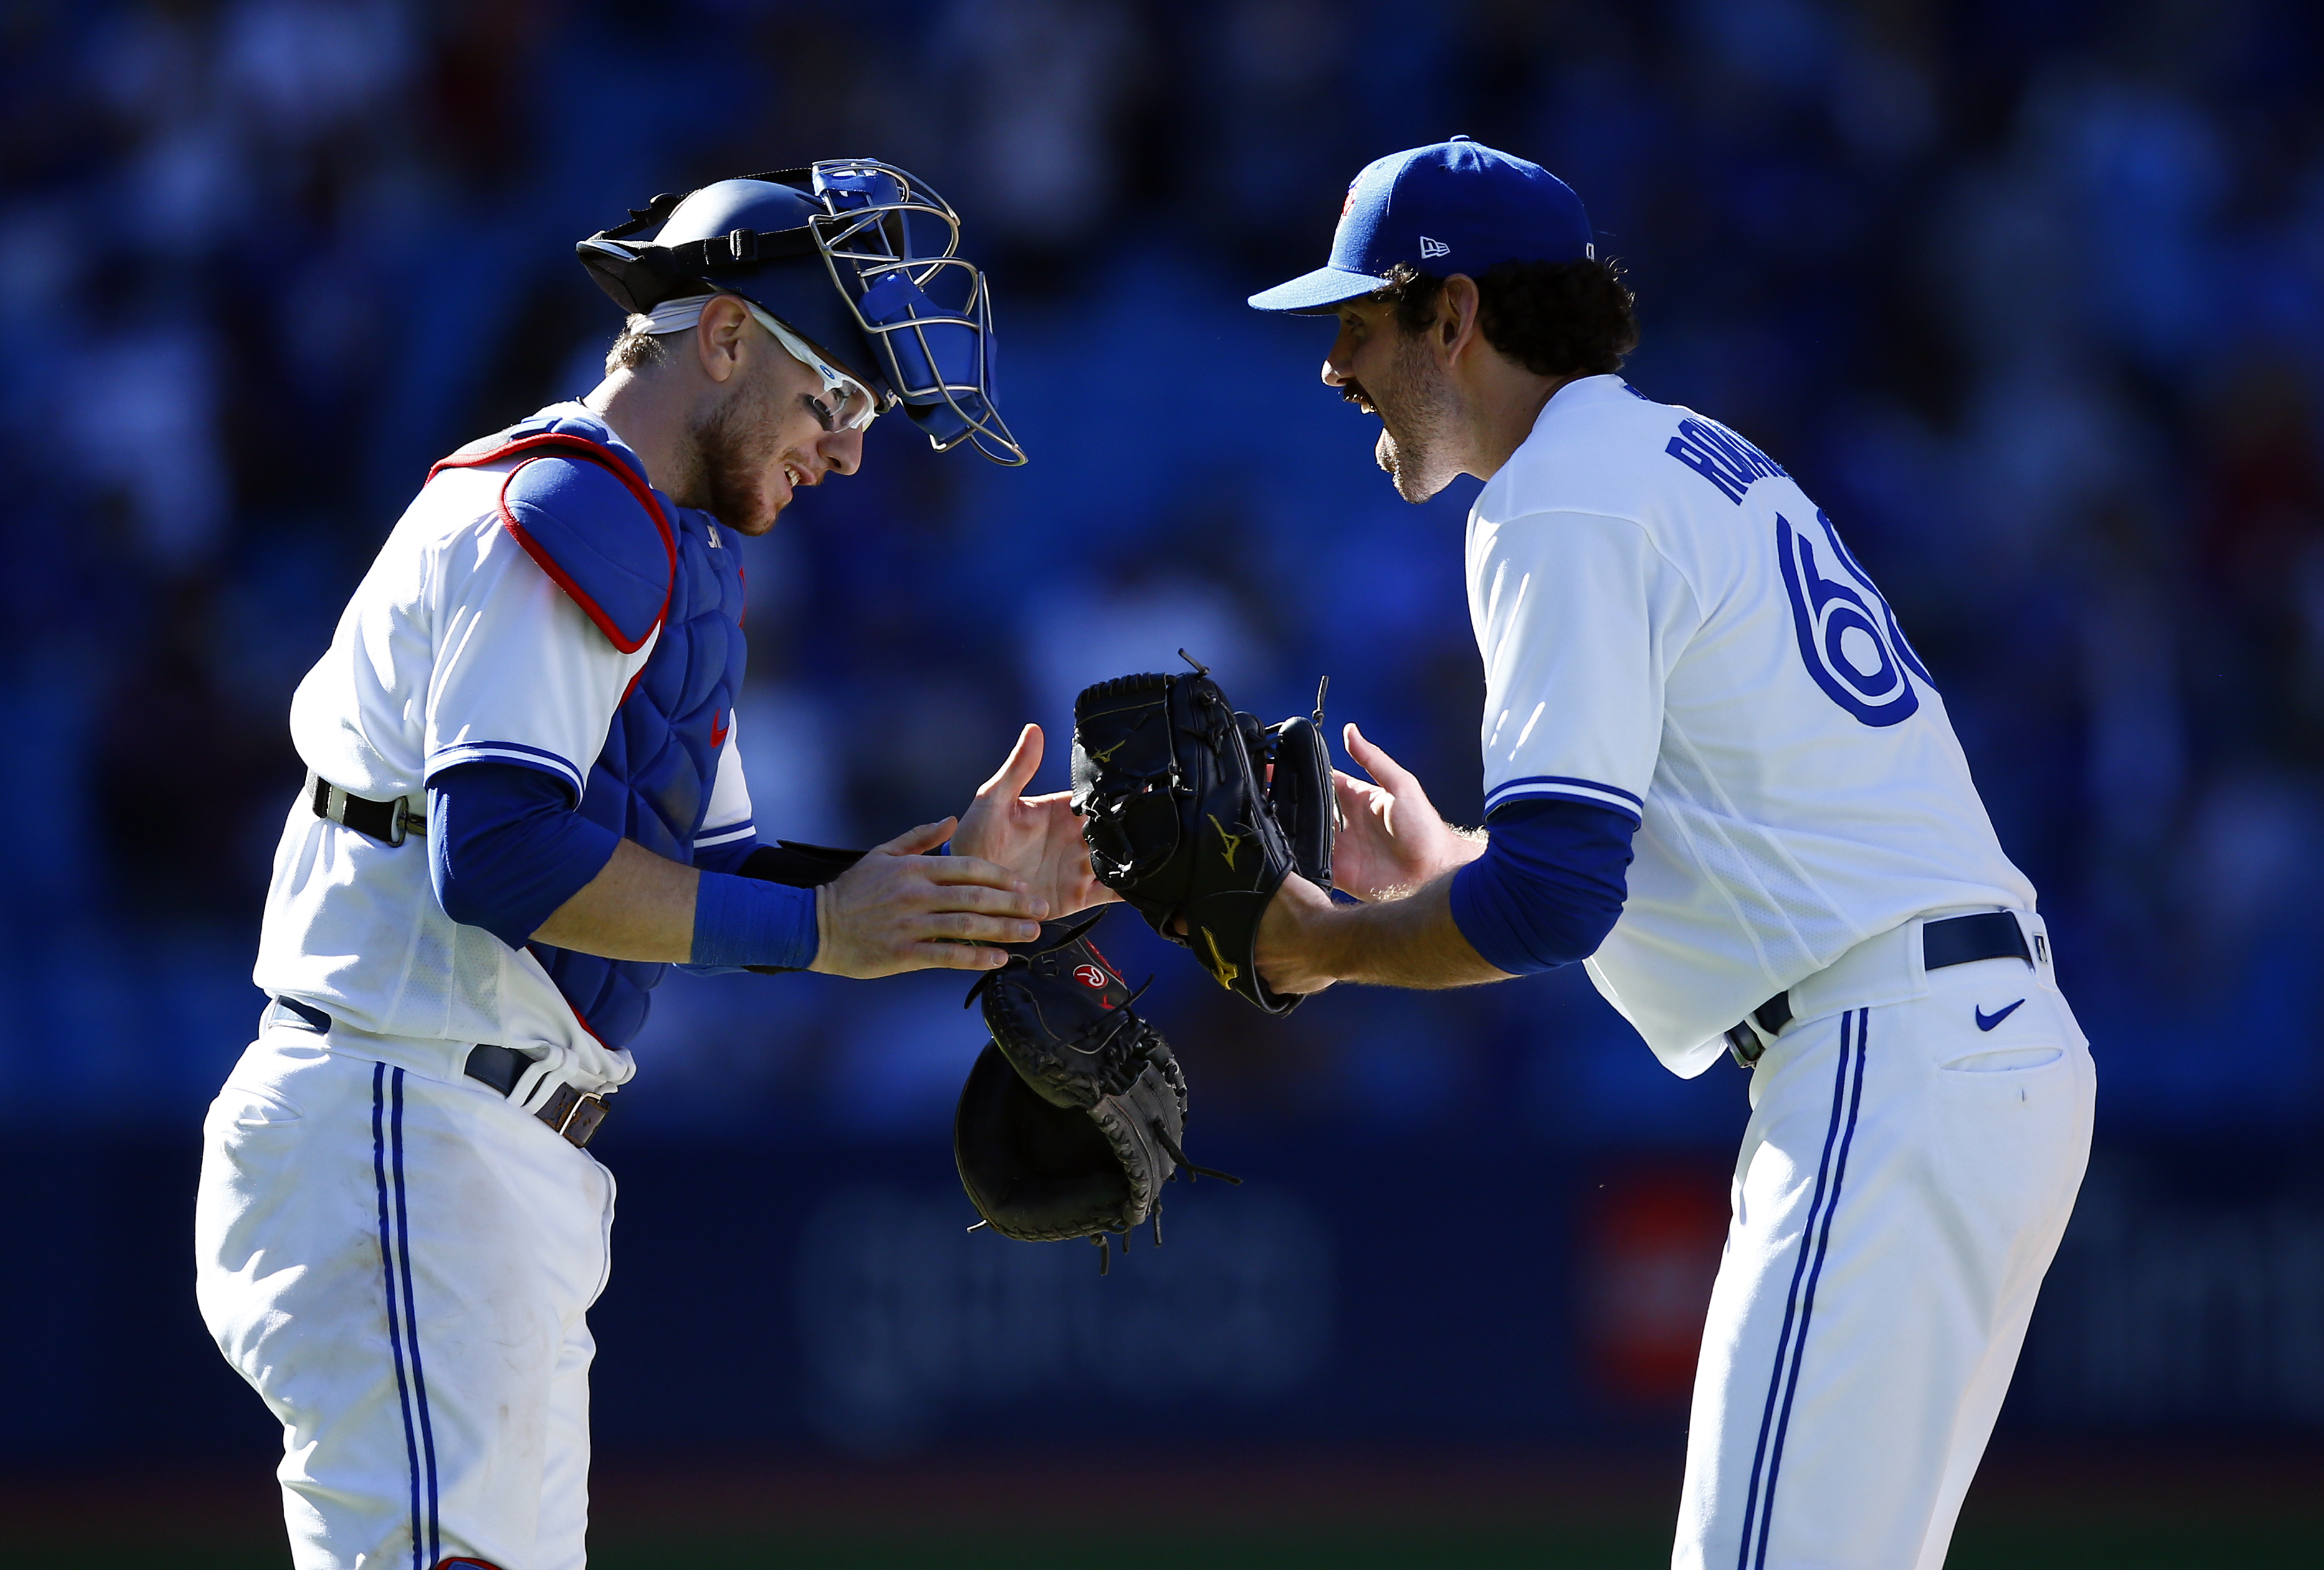 Blue Jays wild-card race heats up after fifth straight win